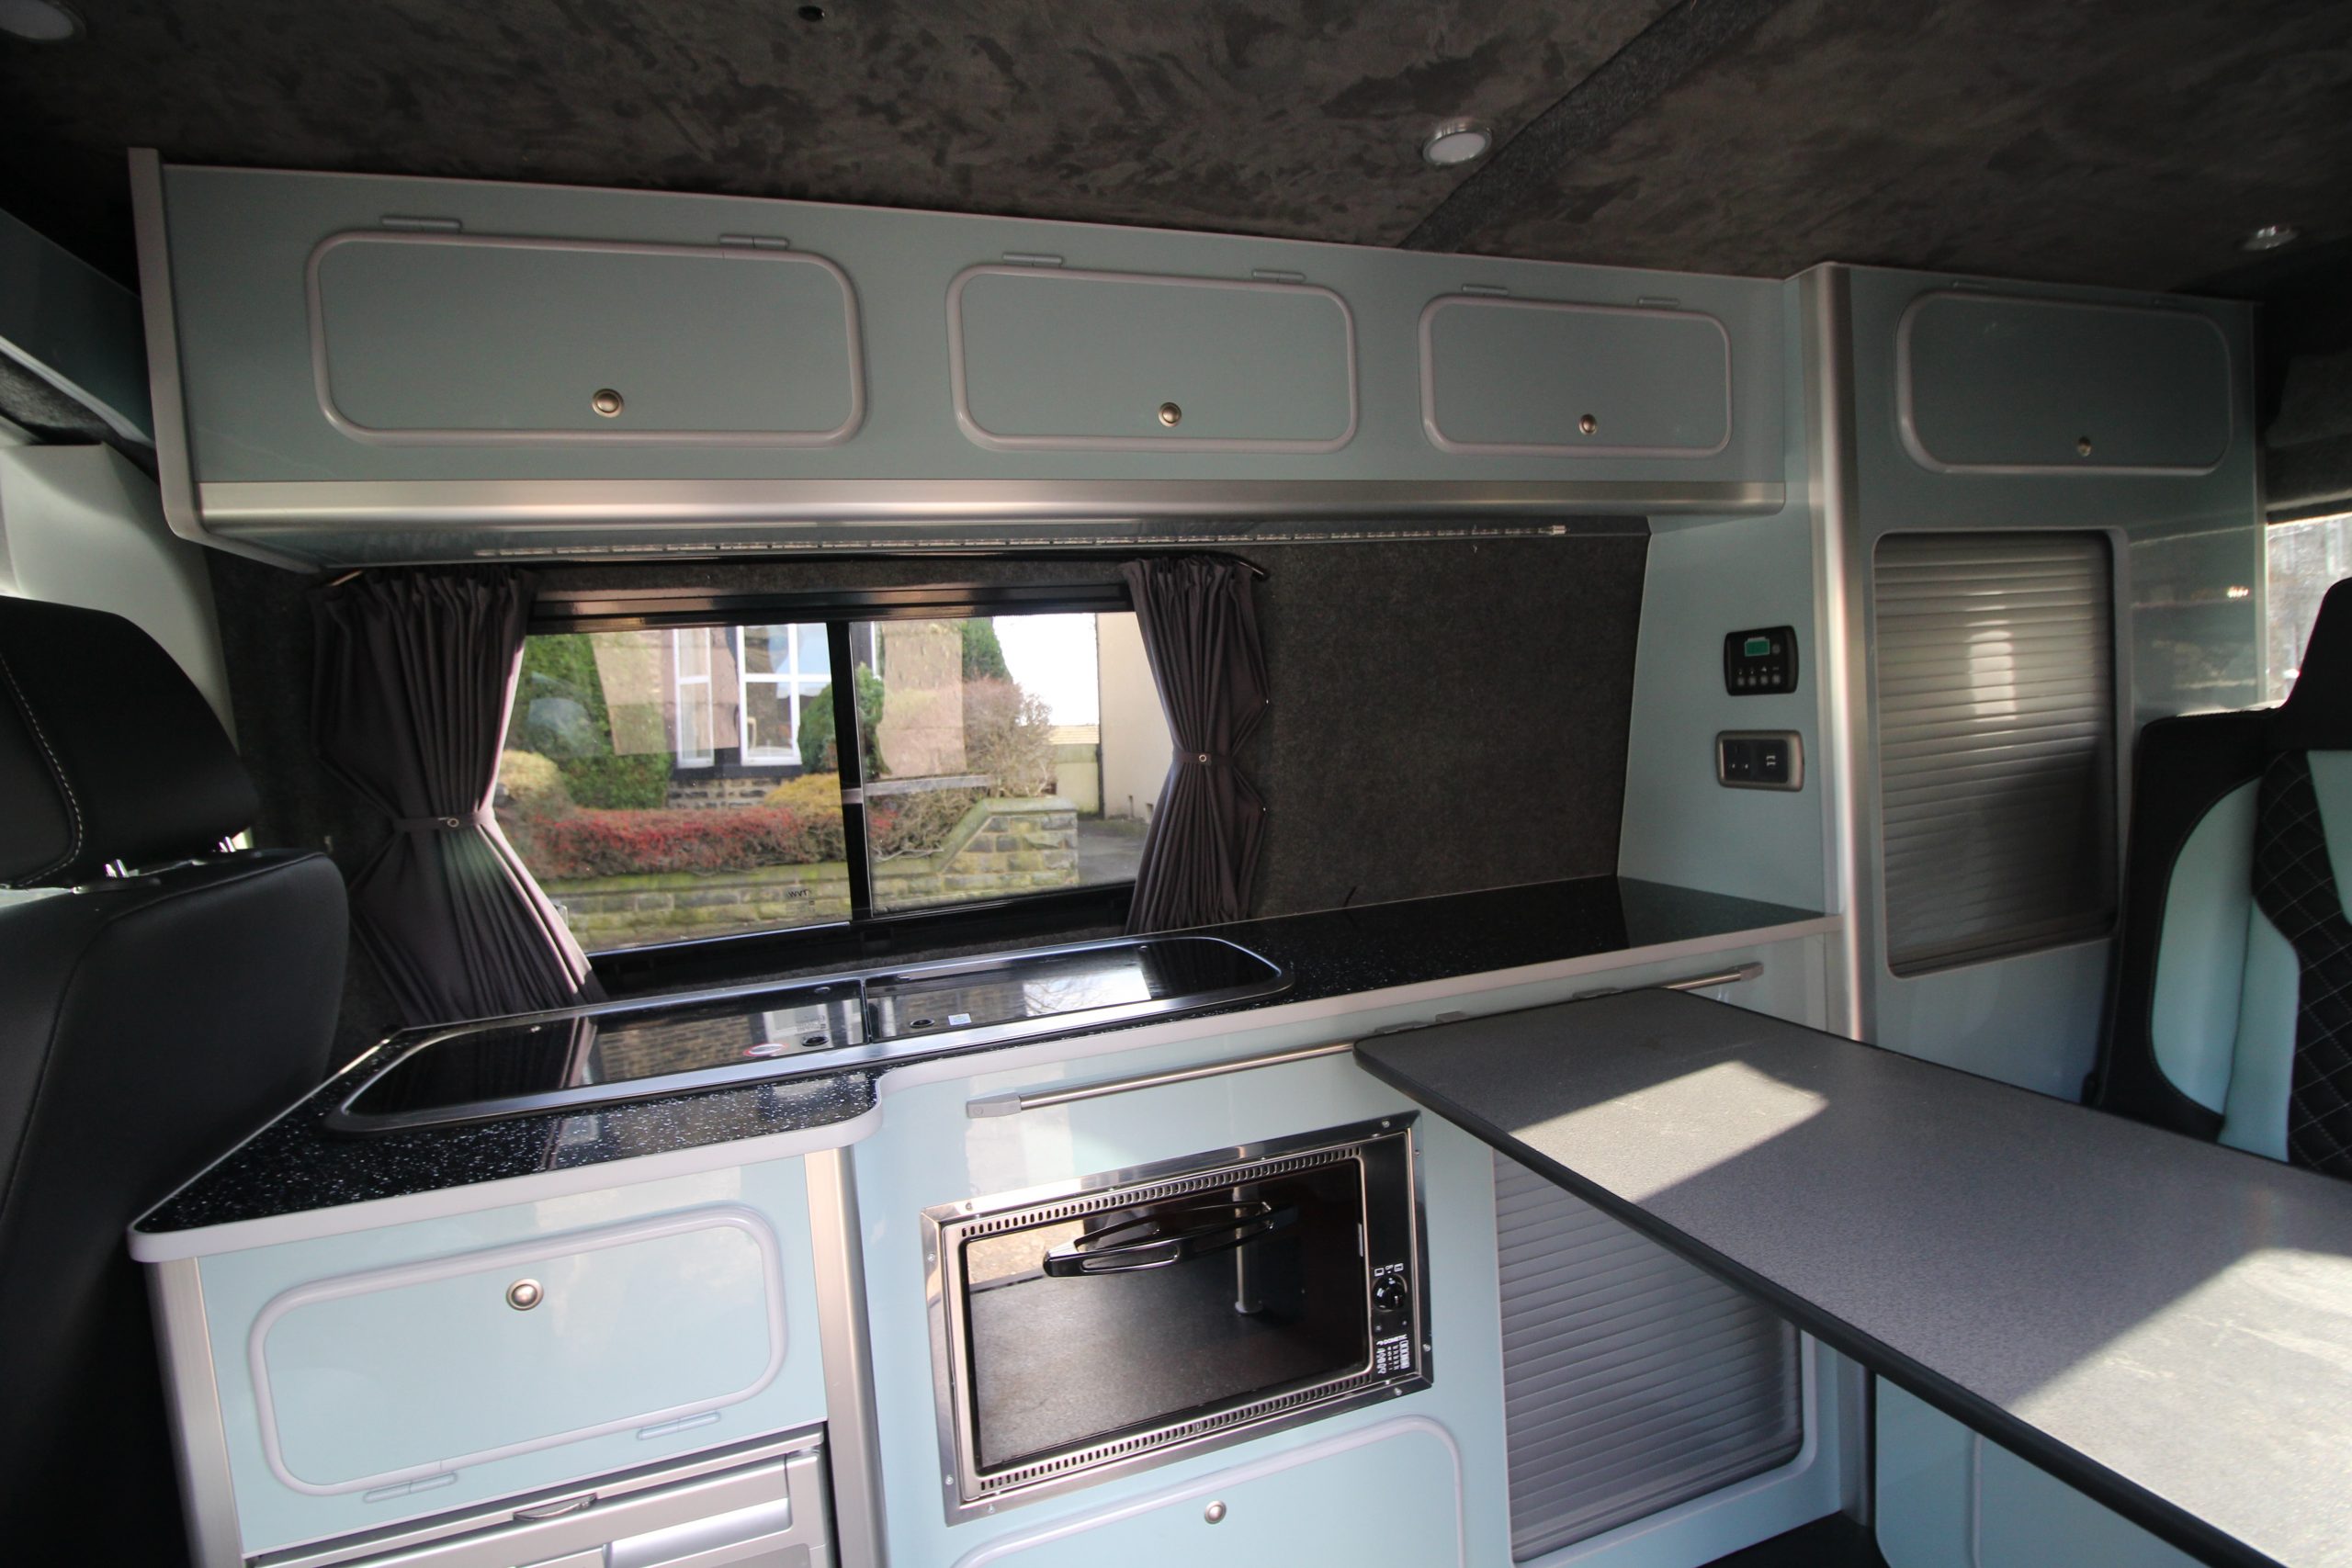 Kitchen Of the white VW Camper